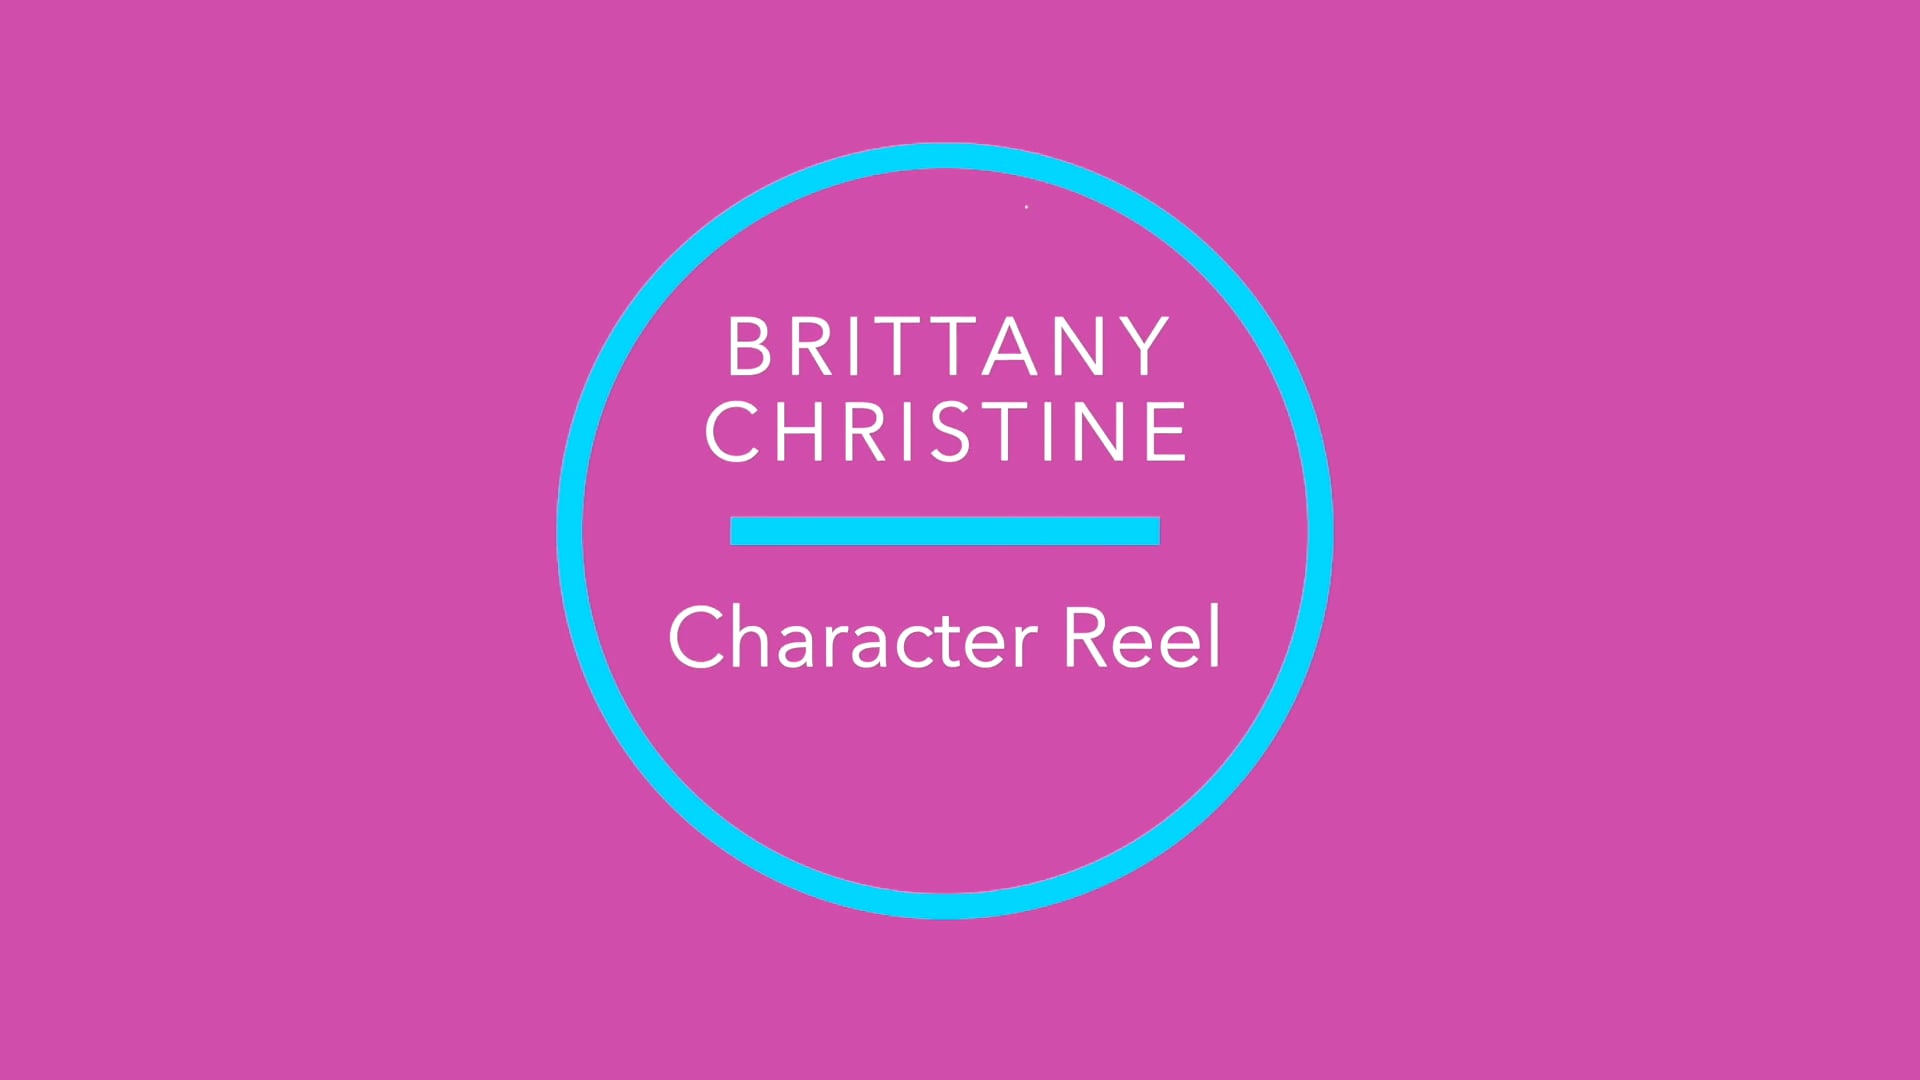 BRITTANY CHRISTINE (Character Reel)